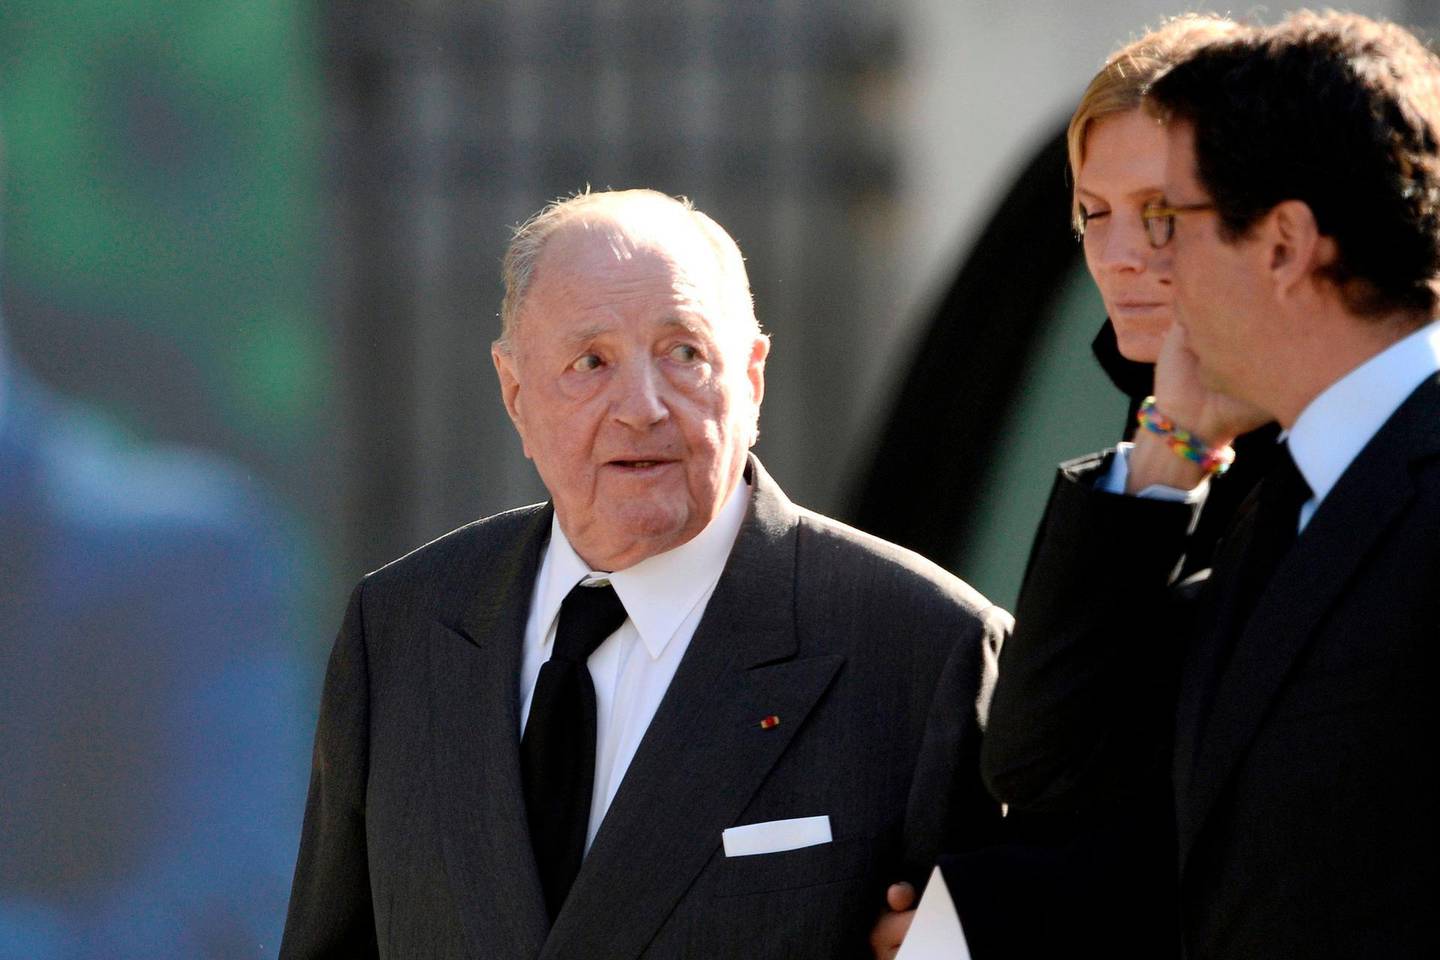 (FILES) In this file photo taken on October 27, 2014 Belgian businessman Albert Frere (L) leaves after attending the memorial service for Total's CEO Christophe de Margerie at the Saint-Sulpice church in Paris.  Belgium's richest man, multi-billionaire entrepreneur Albert Frere, has died aged 92, his investment company GBL announced on December 3, 2018. / AFP / STEPHANE DE SAKUTIN
